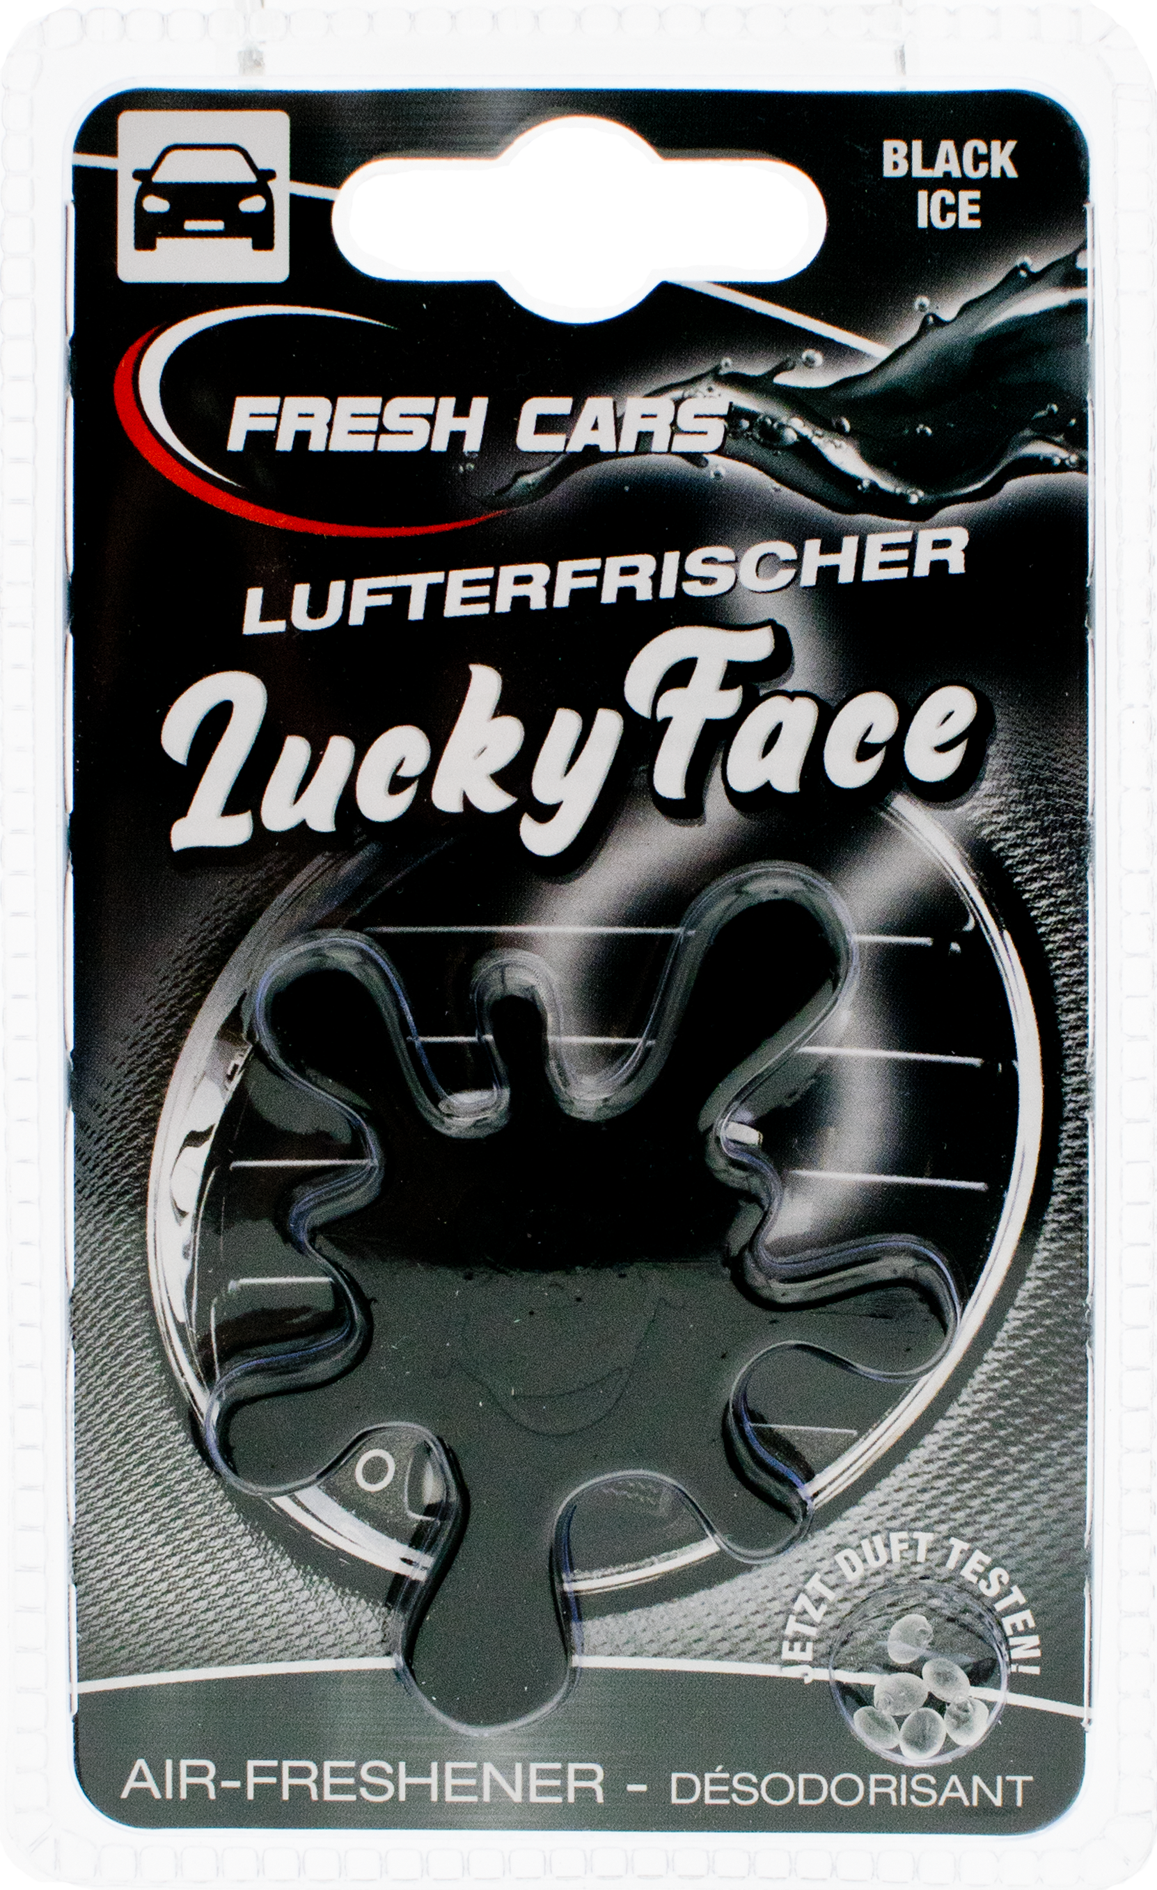 Picture of Lufterfrischer LUCKY FACE Black Ice